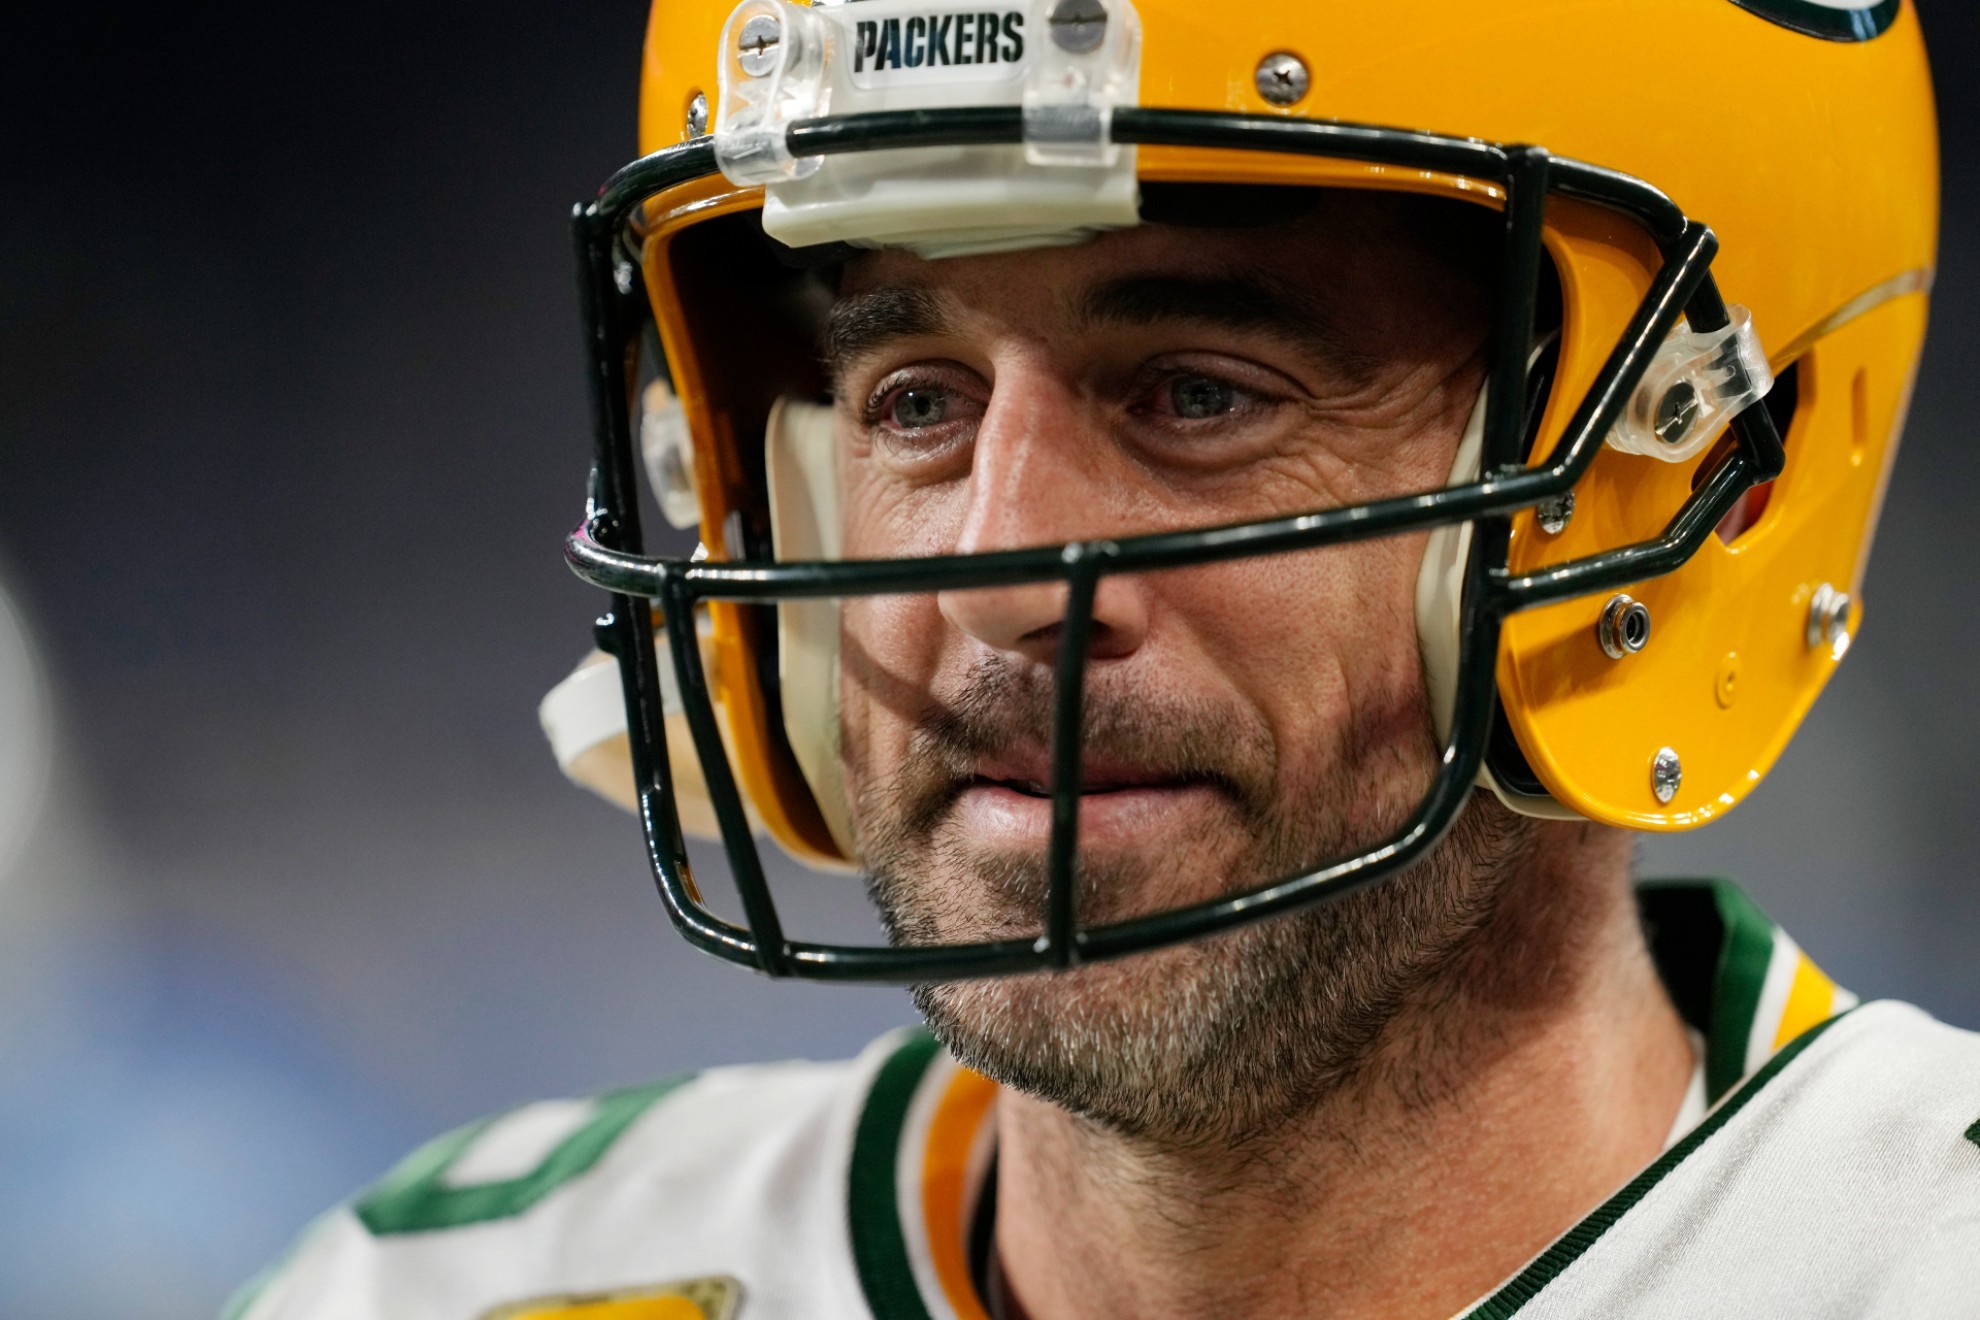 Aaron Rodgers has lost 5 games in a row.